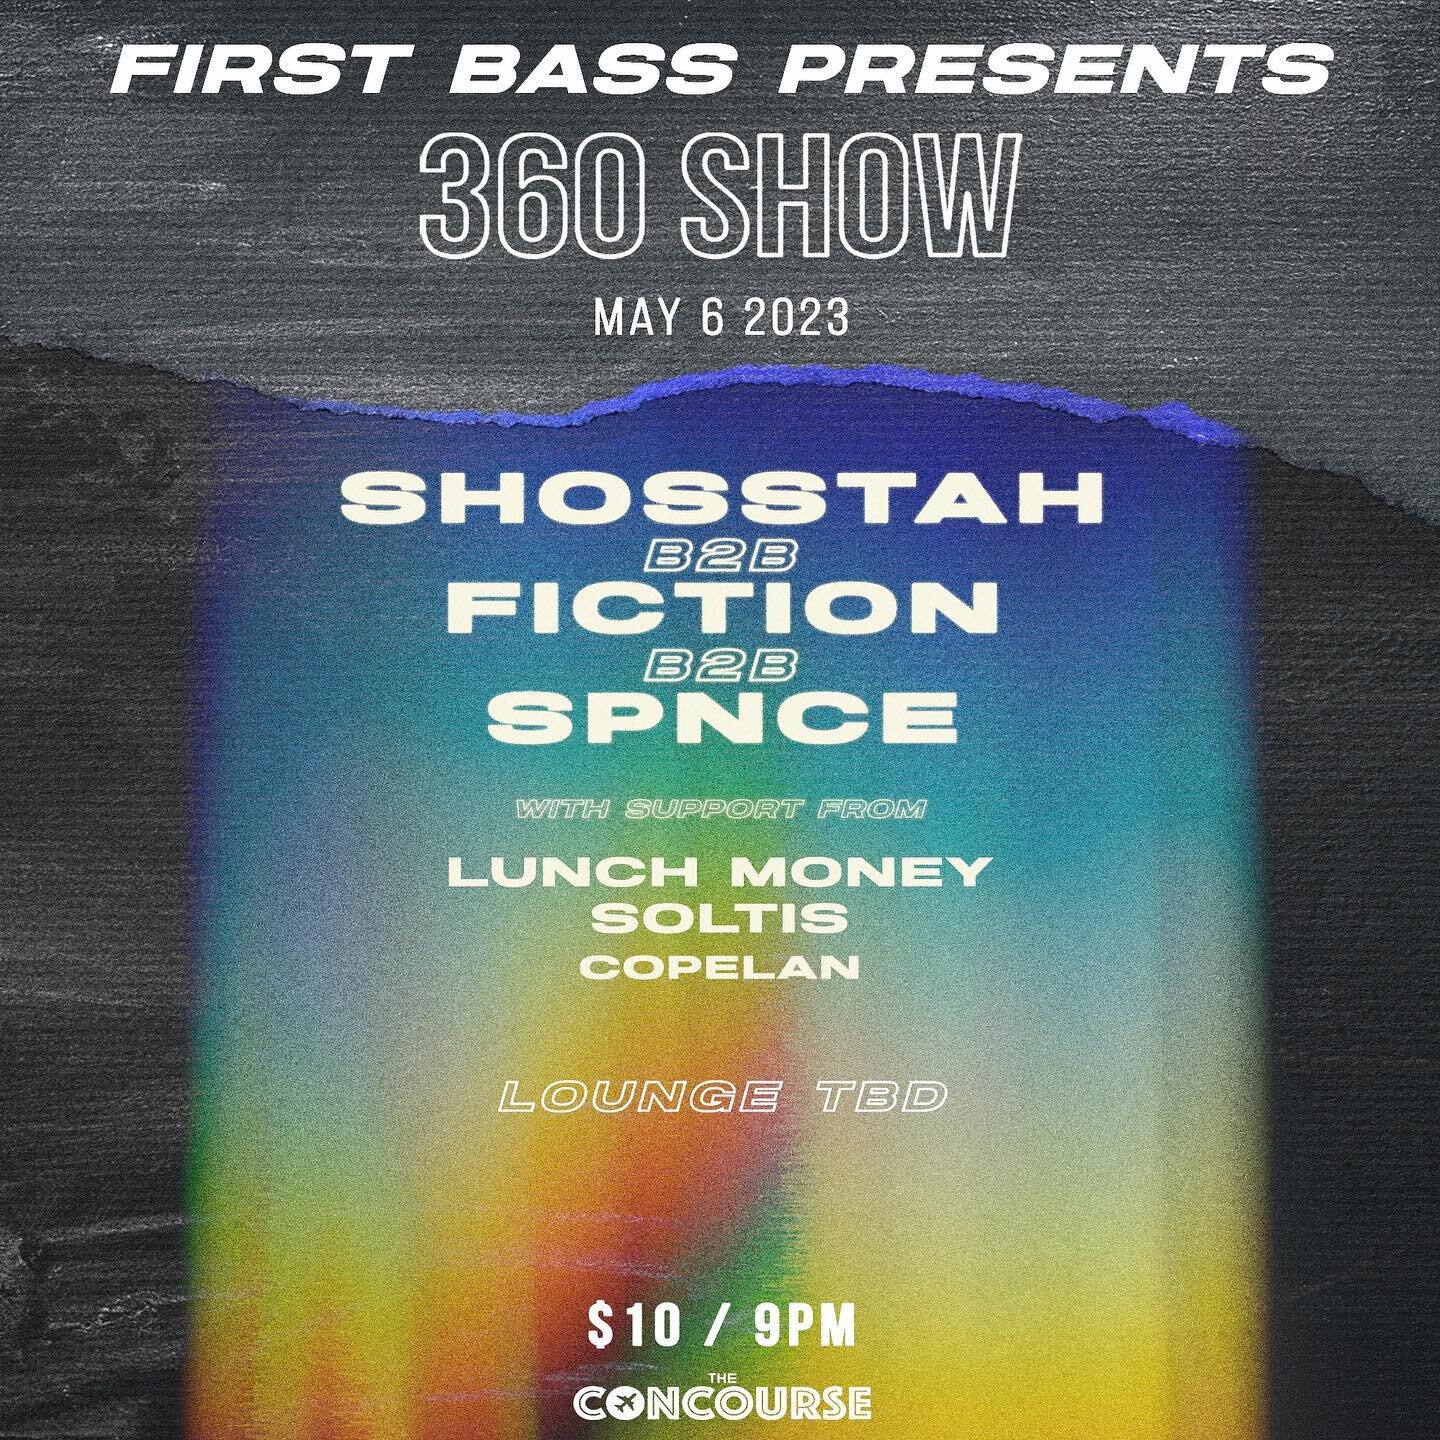 NEXT SATURDAY. We are doing a 360 show for @shosstah&rsquo;s birthday with the incredible @fiction.gif. We are going b2b2b on the floor. Joining us we have @cop3lan @soltisofficial and @lunchmoney140! So come out early, stay late and get ready for th